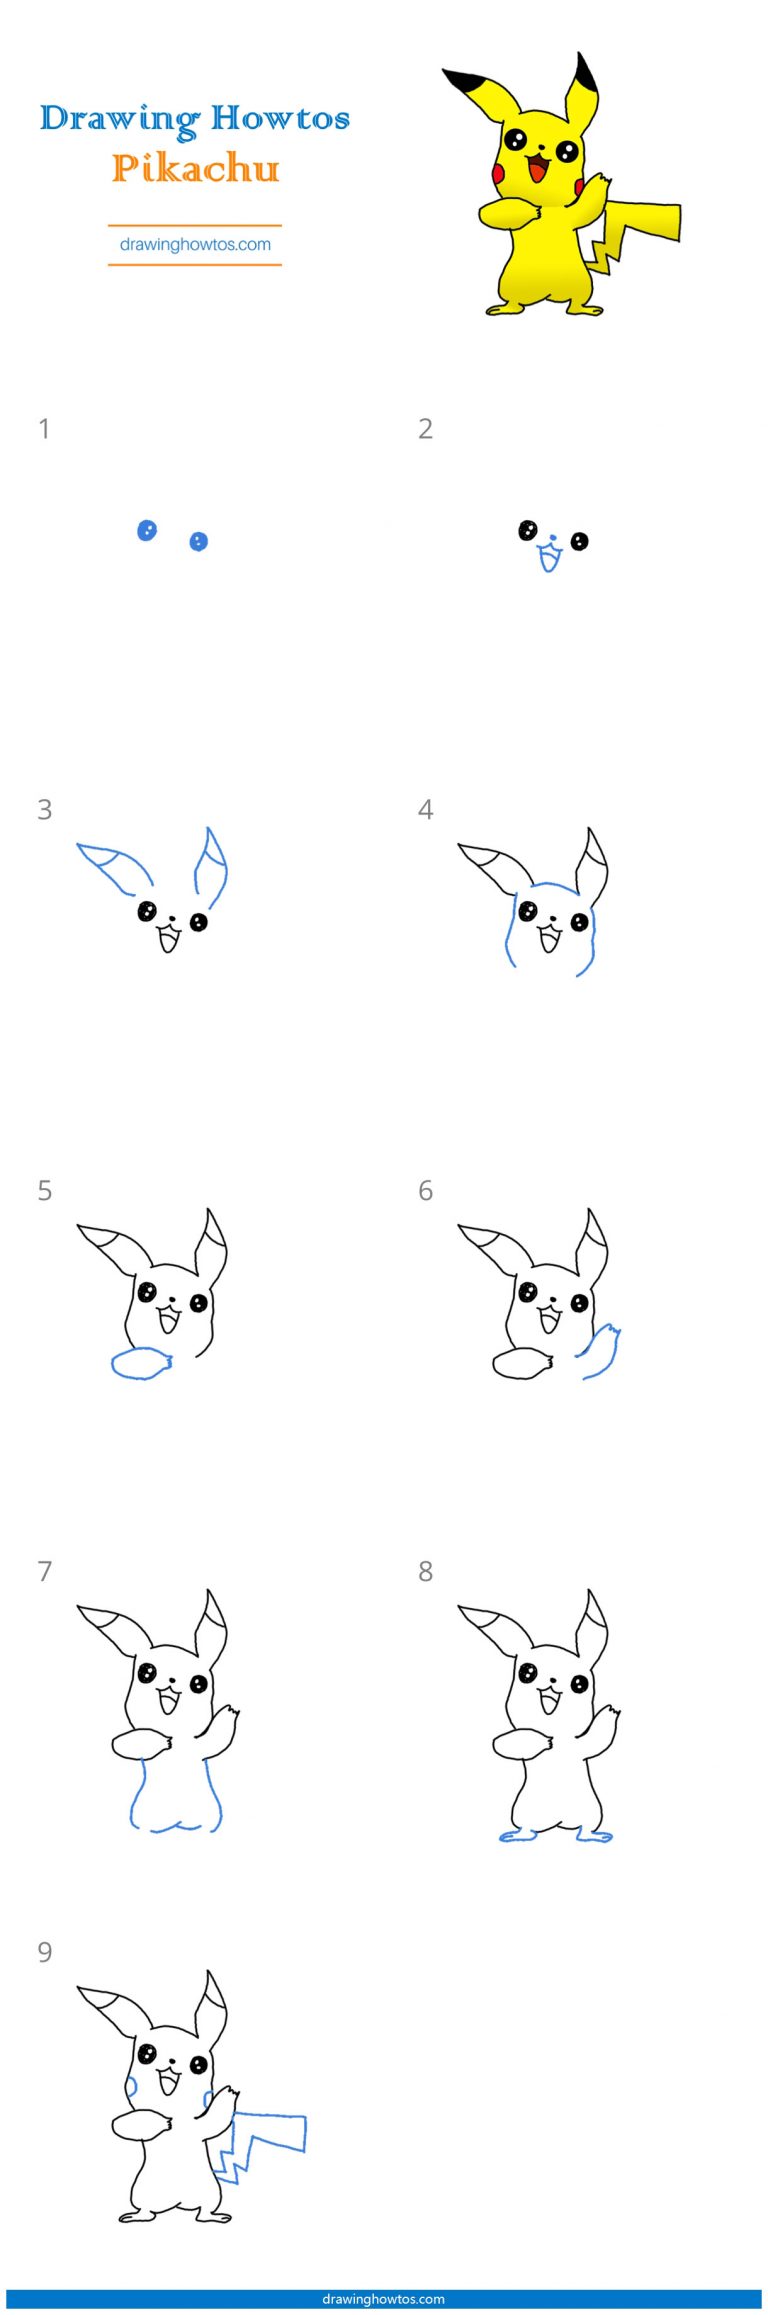 How to Draw a Pikachu - Step by Step Easy Drawing Guides - Drawing Howtos